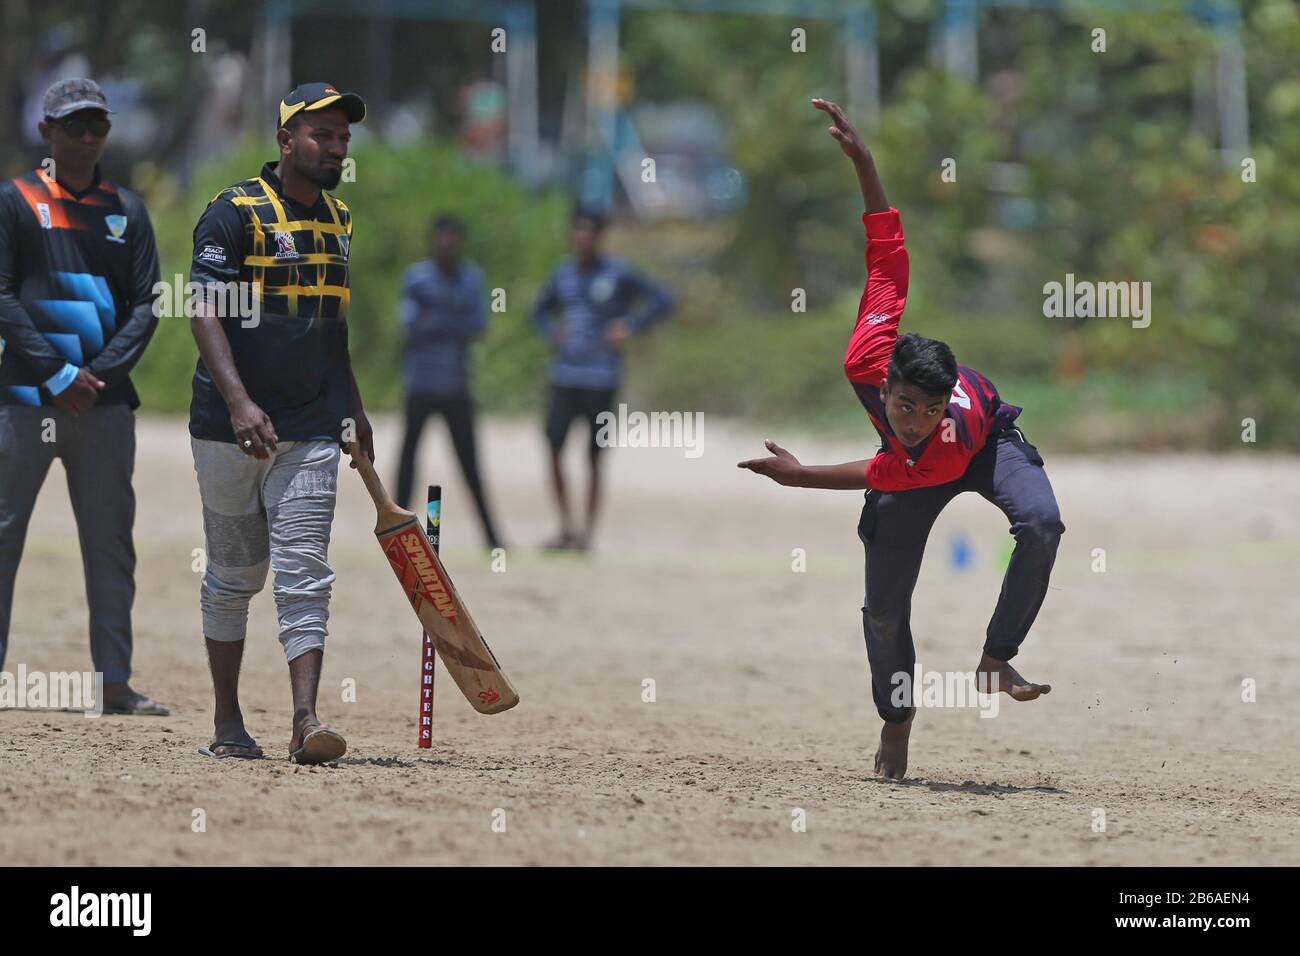 Sri Lankan cricket fans play on the beach prior to the first test match between England and Sri Lanka, Sunday, March 8, 2020, at Galle, Sri Lanka. The first match will be played between England and Sri Lanka will be played on March 19, 2020 in Galle.The second will start on March 27, 2020,in Colombo. (Nick Atkins-ESPA-Images/Image of Sport via AP) Photo via Newscom Stock Photo